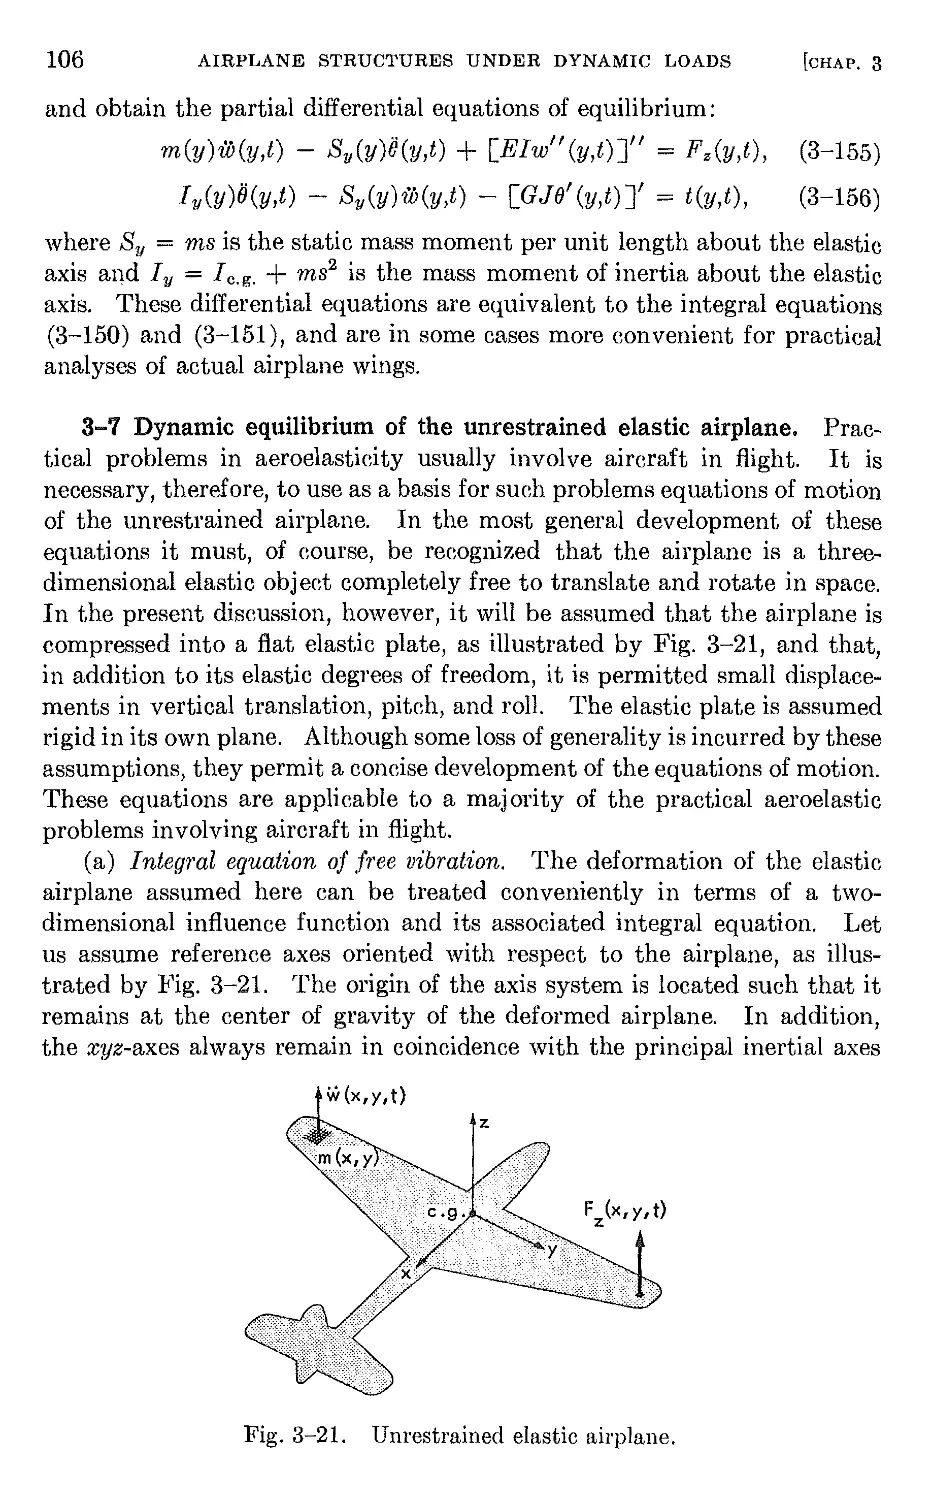 3.7 Dynamic equilibrium of the unrestrained elastic airplane